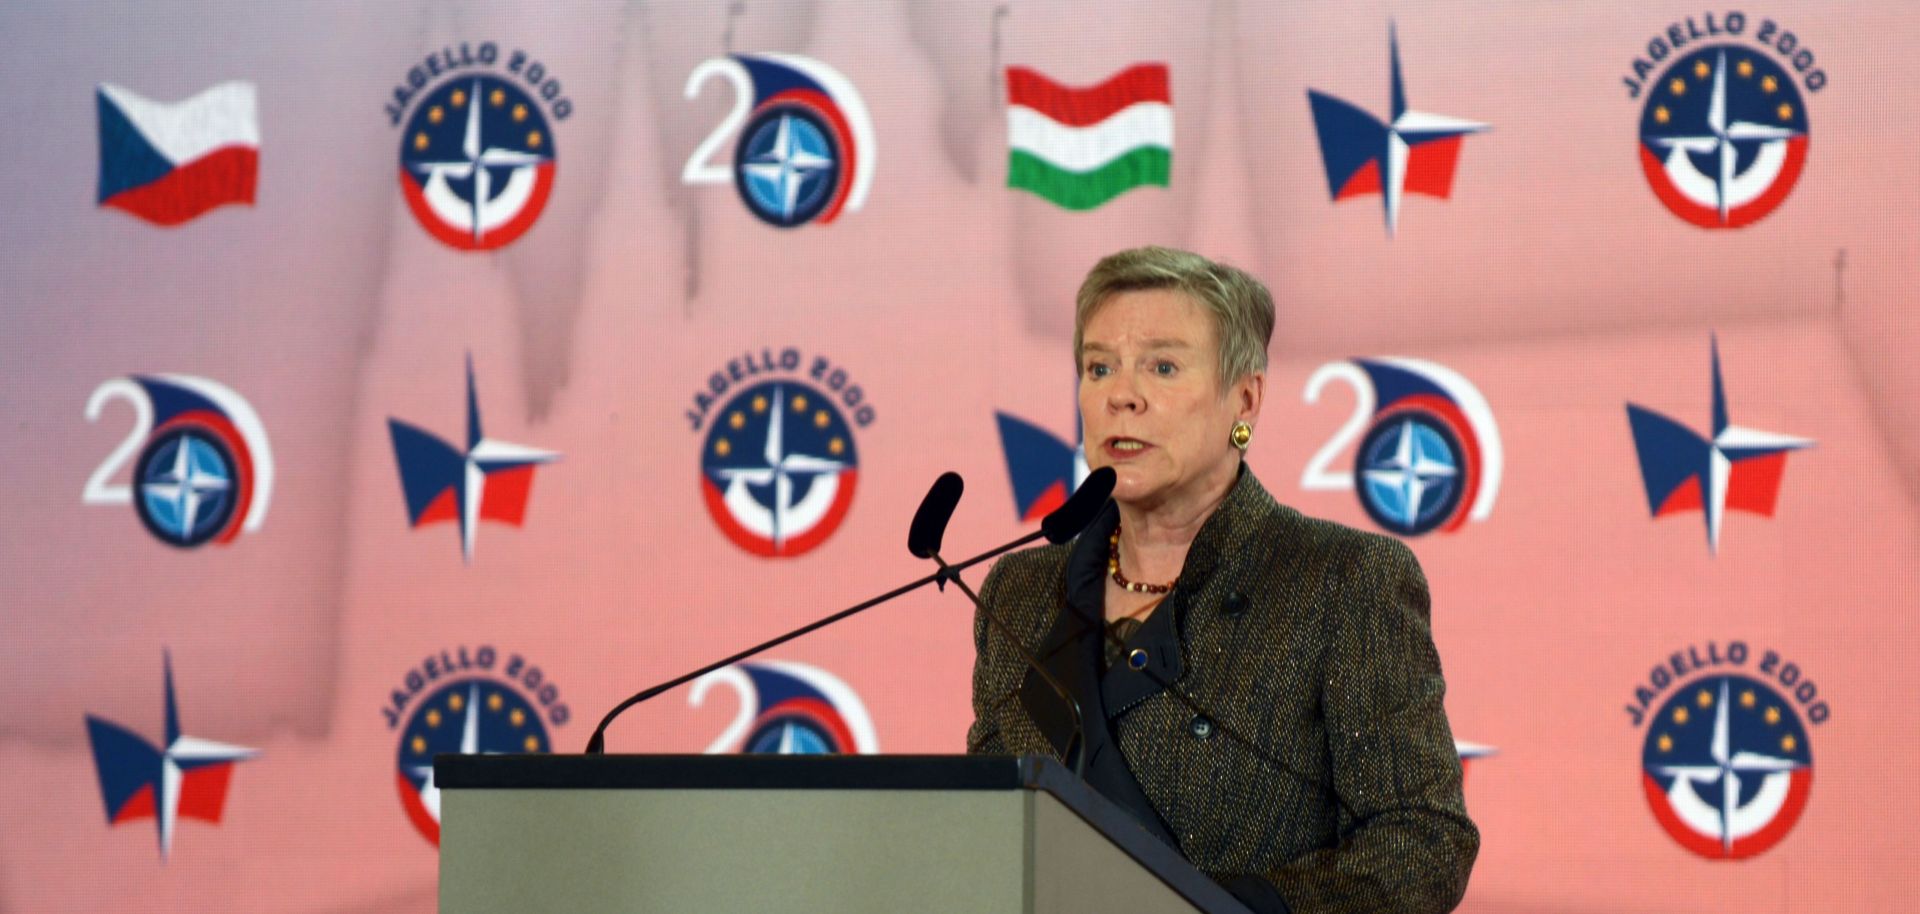 This photo shows Rose Gottemoeller, deputy secretary-general of NATO, delivering a speech in Prague, Czech Republic, on the occasion of the 20th anniversary of the military alliance's eastward expansion.